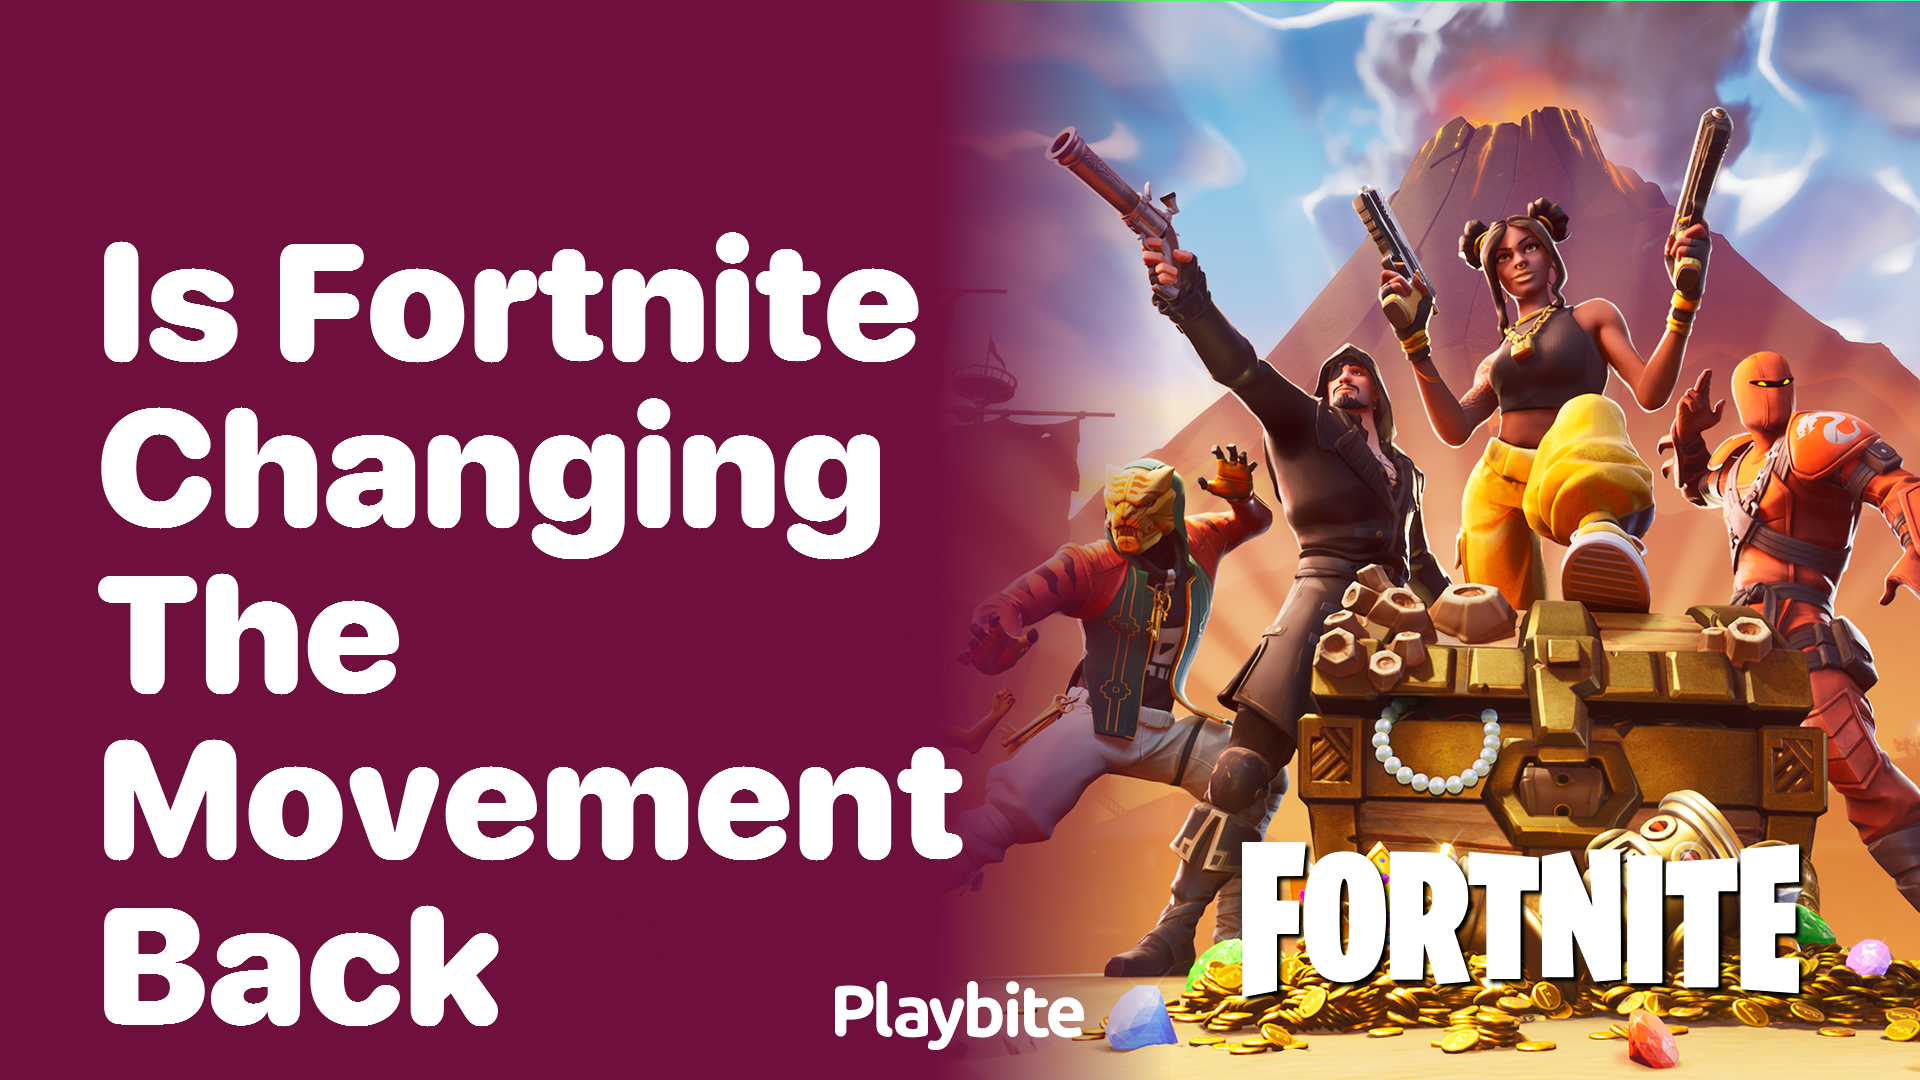 Is Fortnite Changing the Movement Back?